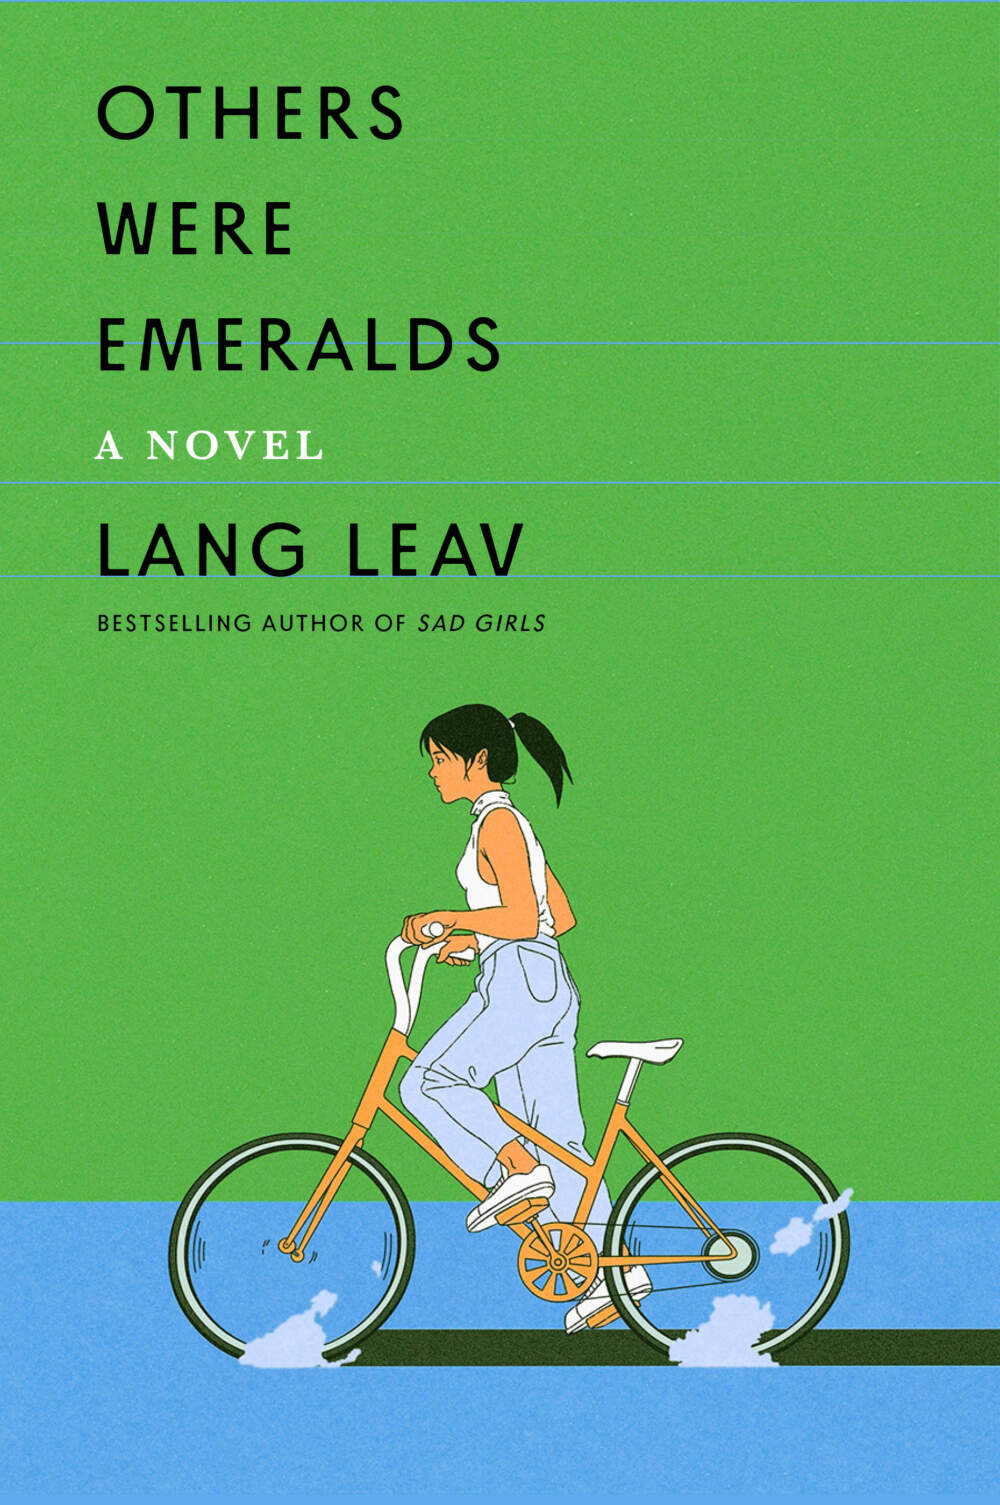 The cover of "Others Were Emeralds." (Courtesy)